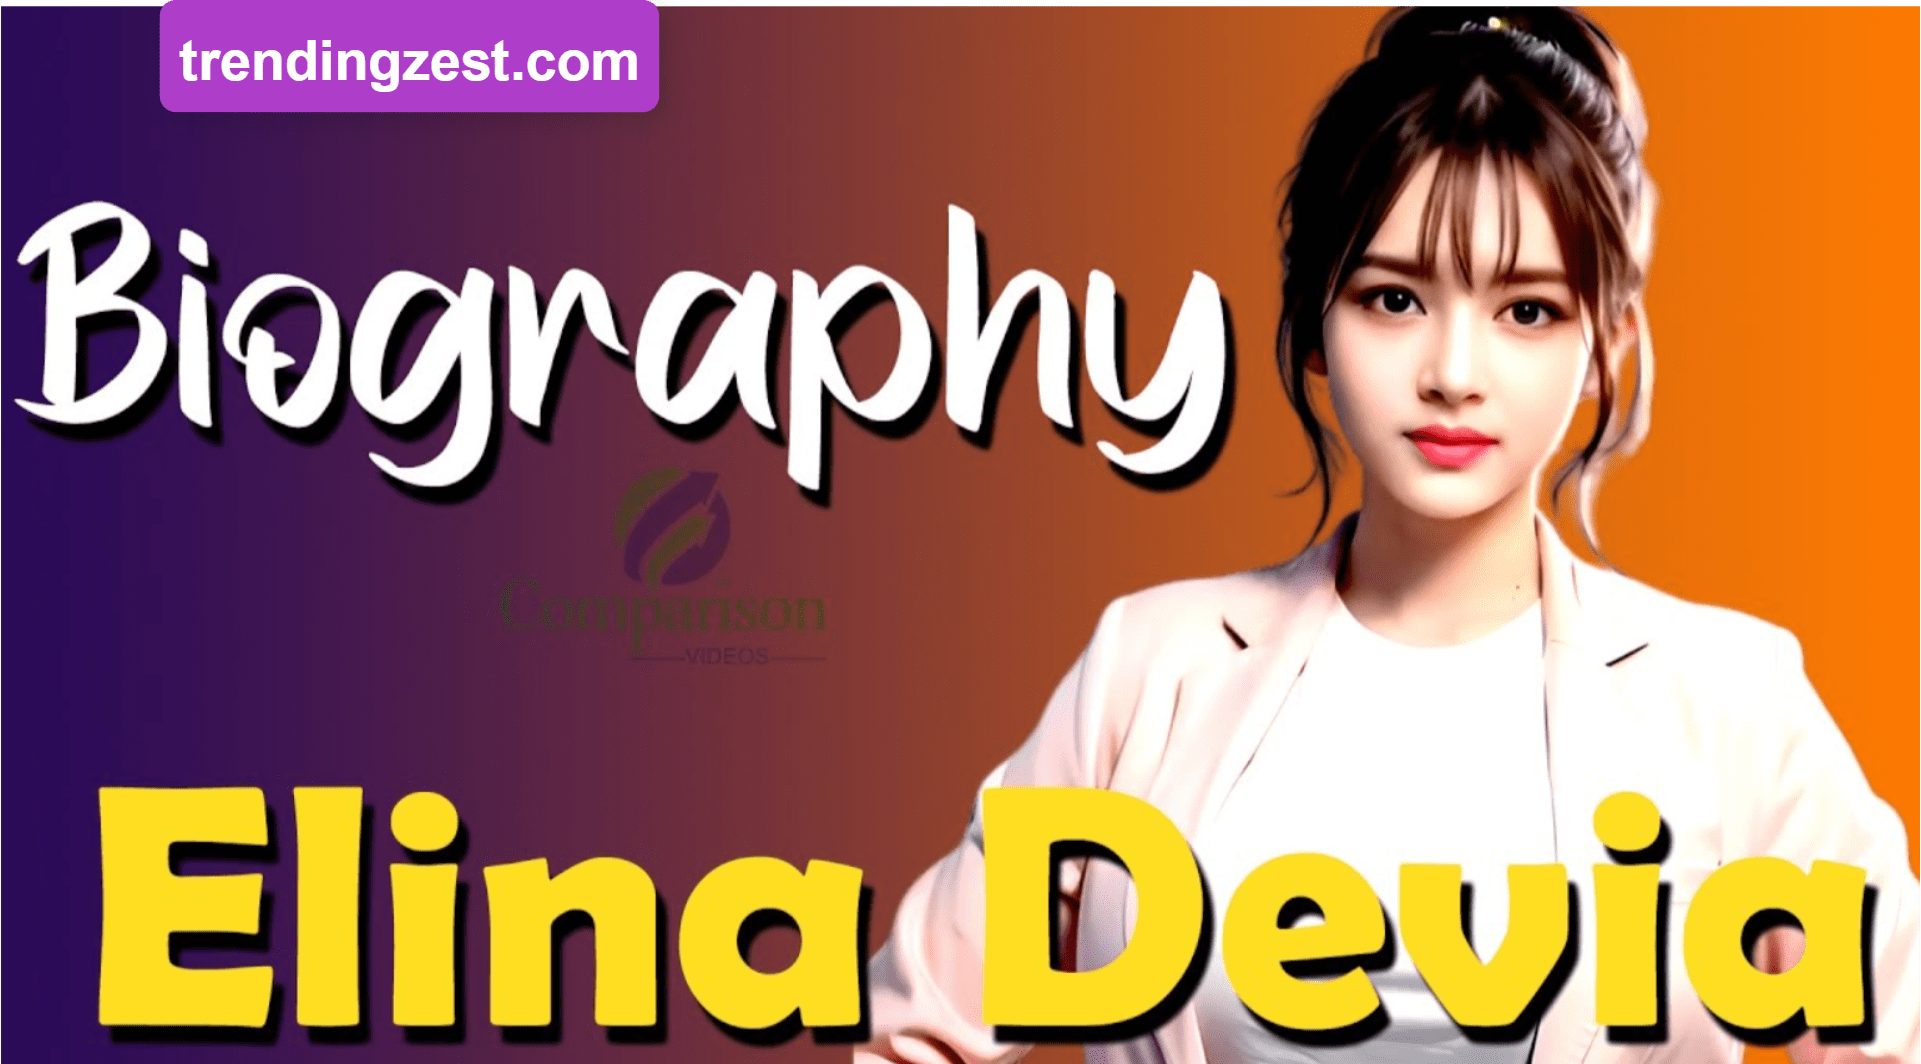 Exploring Elina Dеvia: Biography, Age, Net Worth, Education, Relationship, and Career